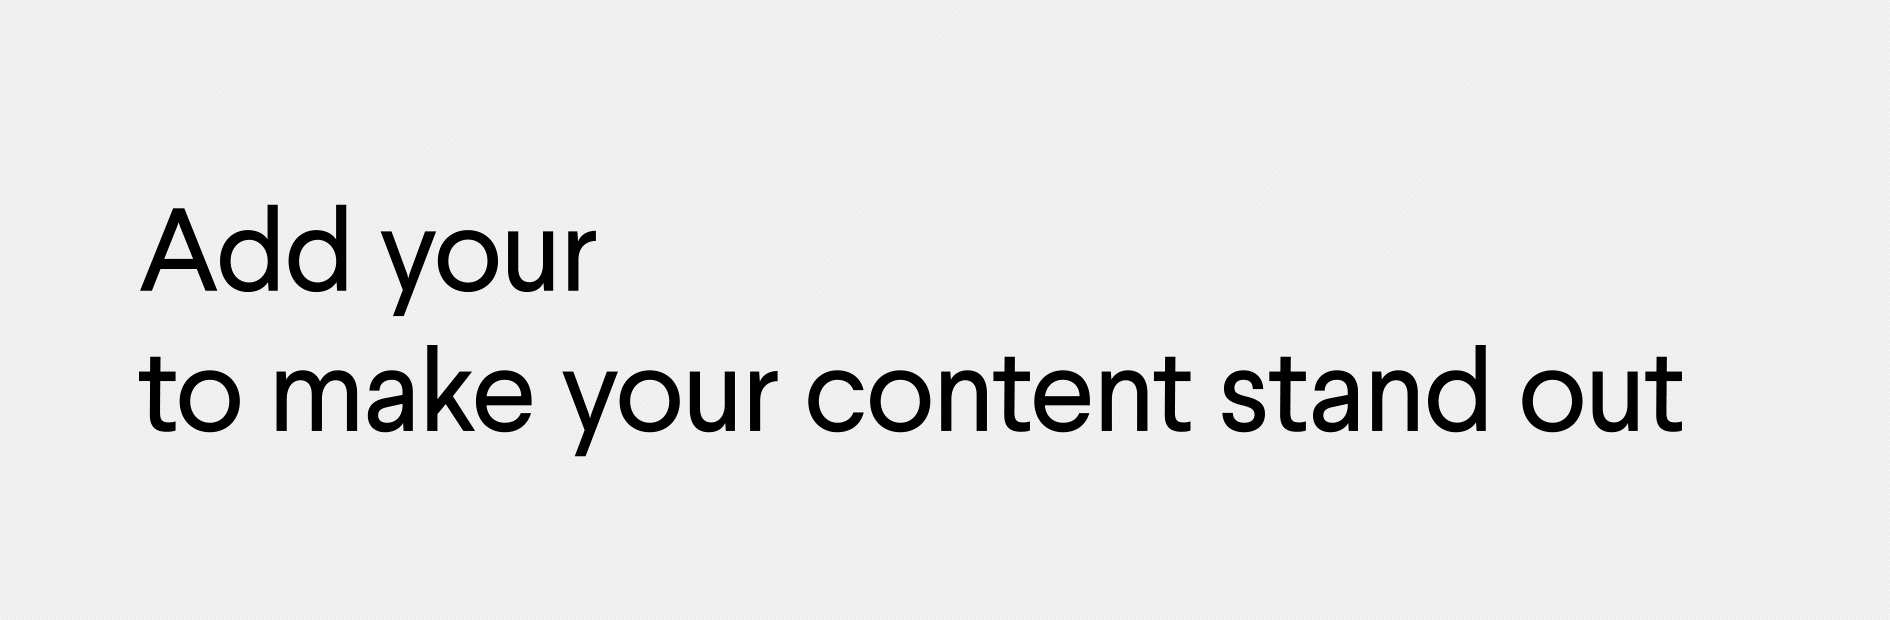 Make your content stand out